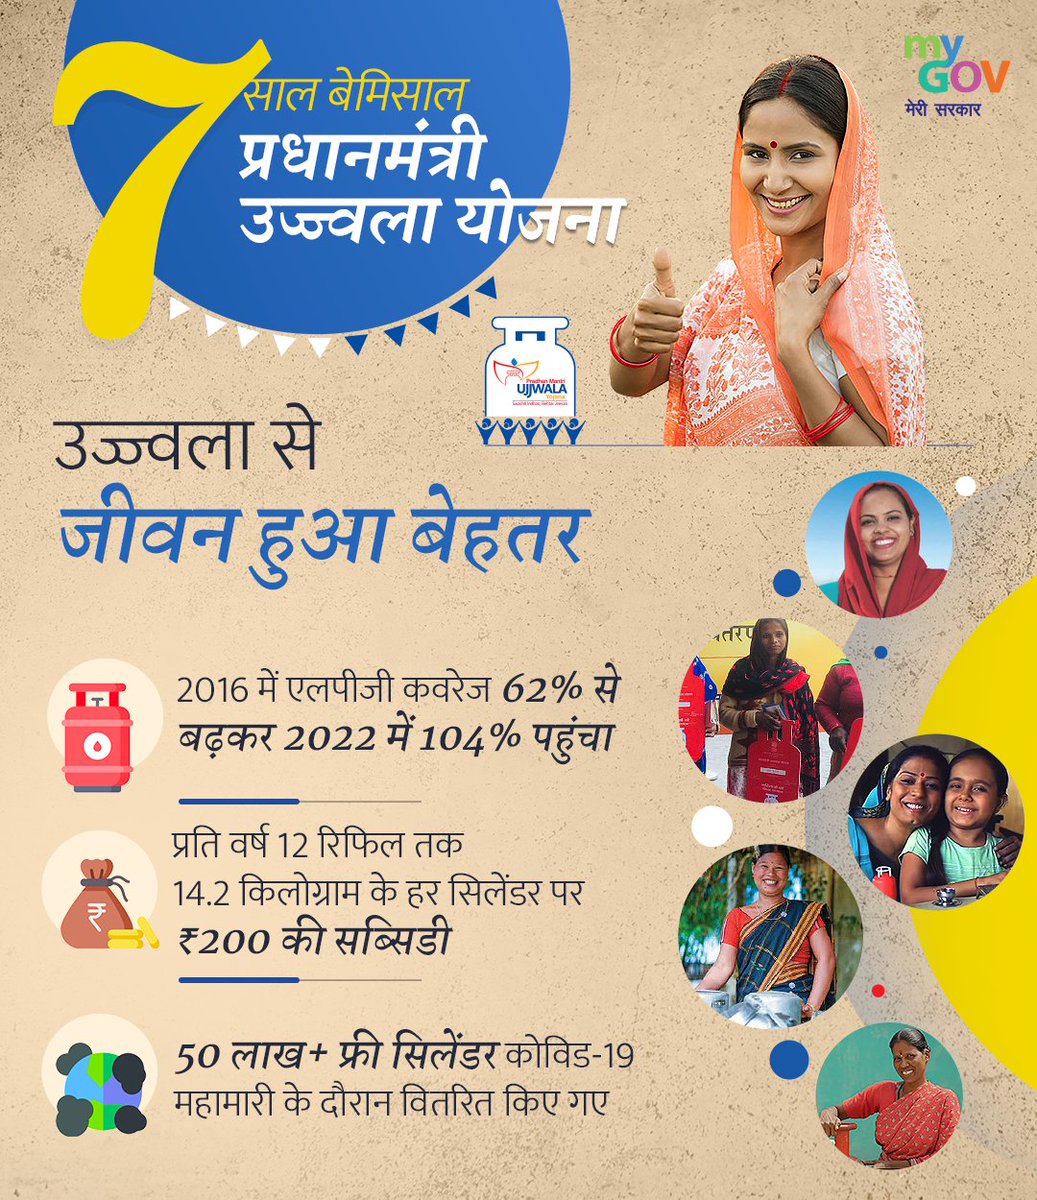 Ujjwala Yojana is a beacon of hope for millions of households in India!

With clean and affordable cooking fuel, it is igniting hopes and lifting the lives of millions of families.

#7YearsOfUjjwala
#UjwallaSeUjwalBharat
#UjjwalaYojana